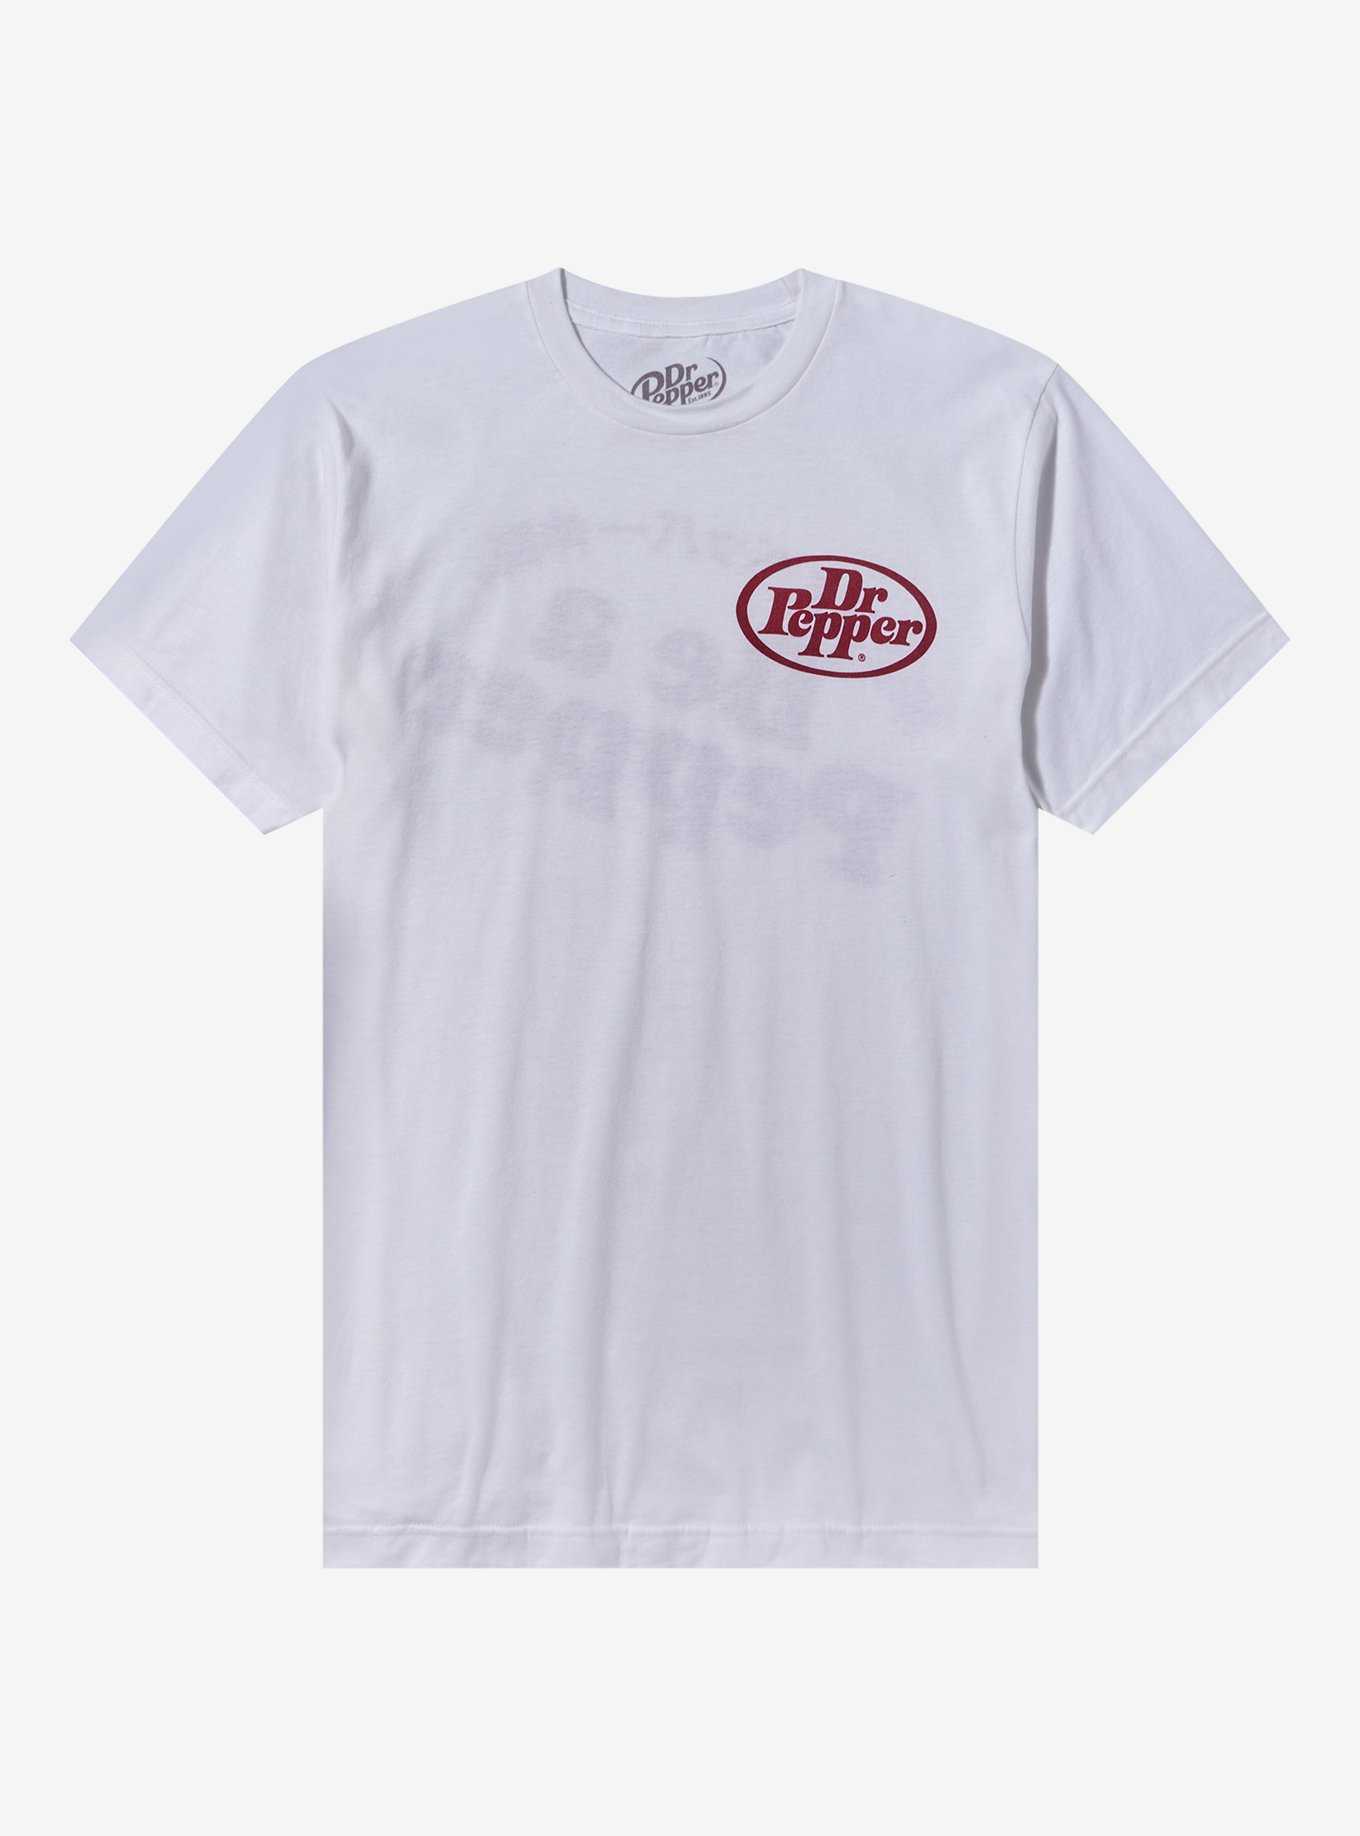 Dr. Pepper Japanese Double-Sided T-Shirt, , hi-res